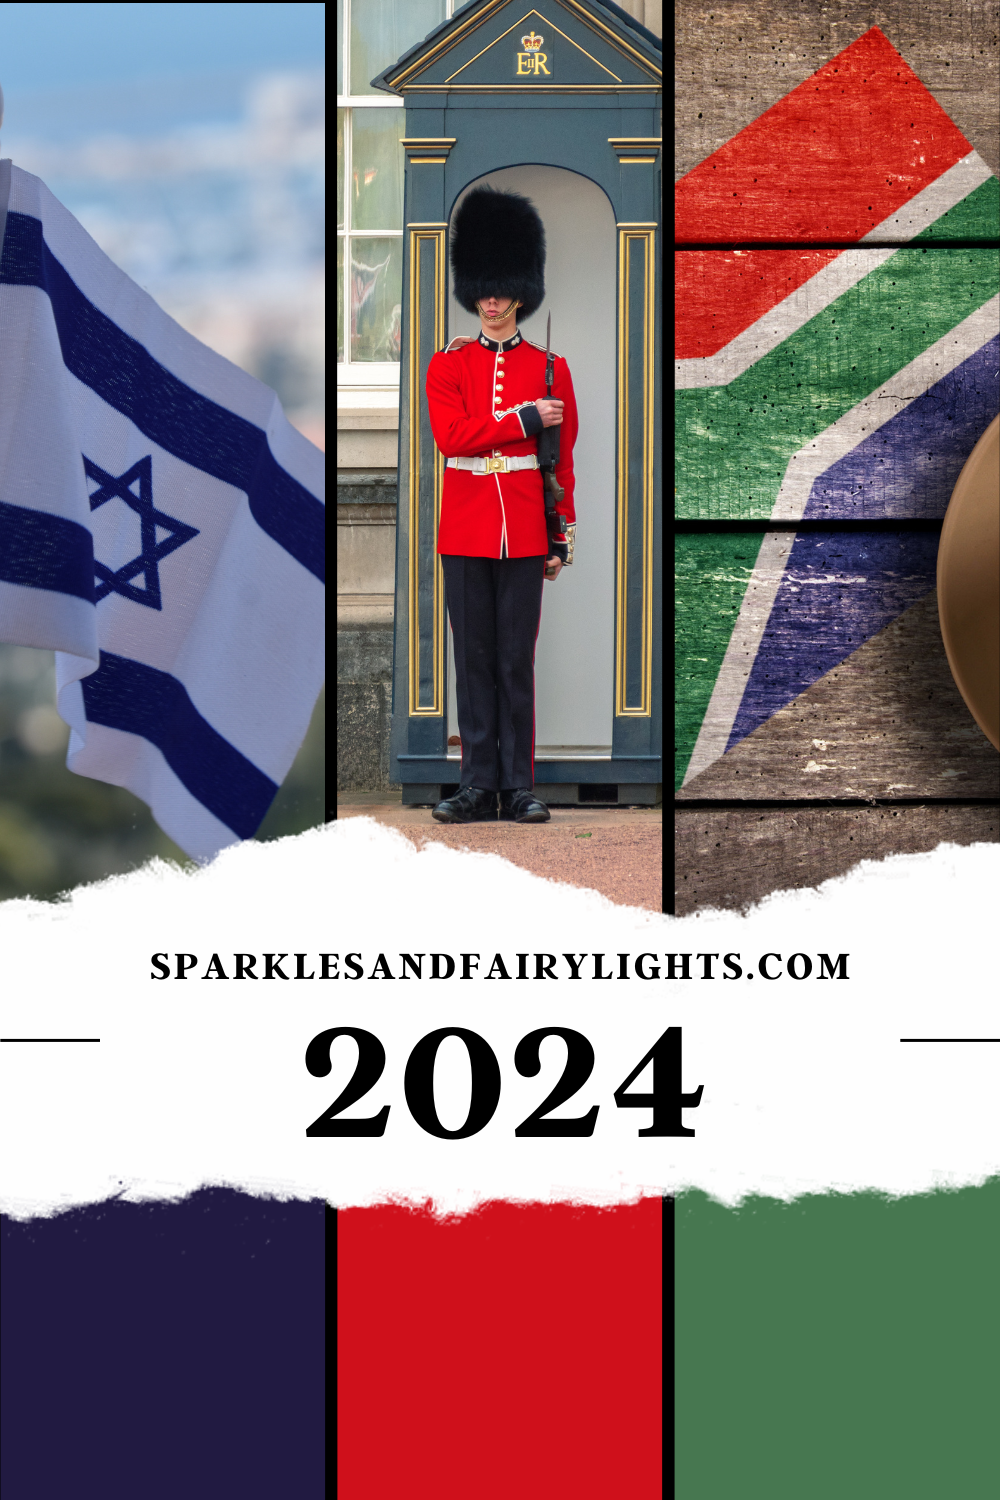 The start of 2024 has required hope already